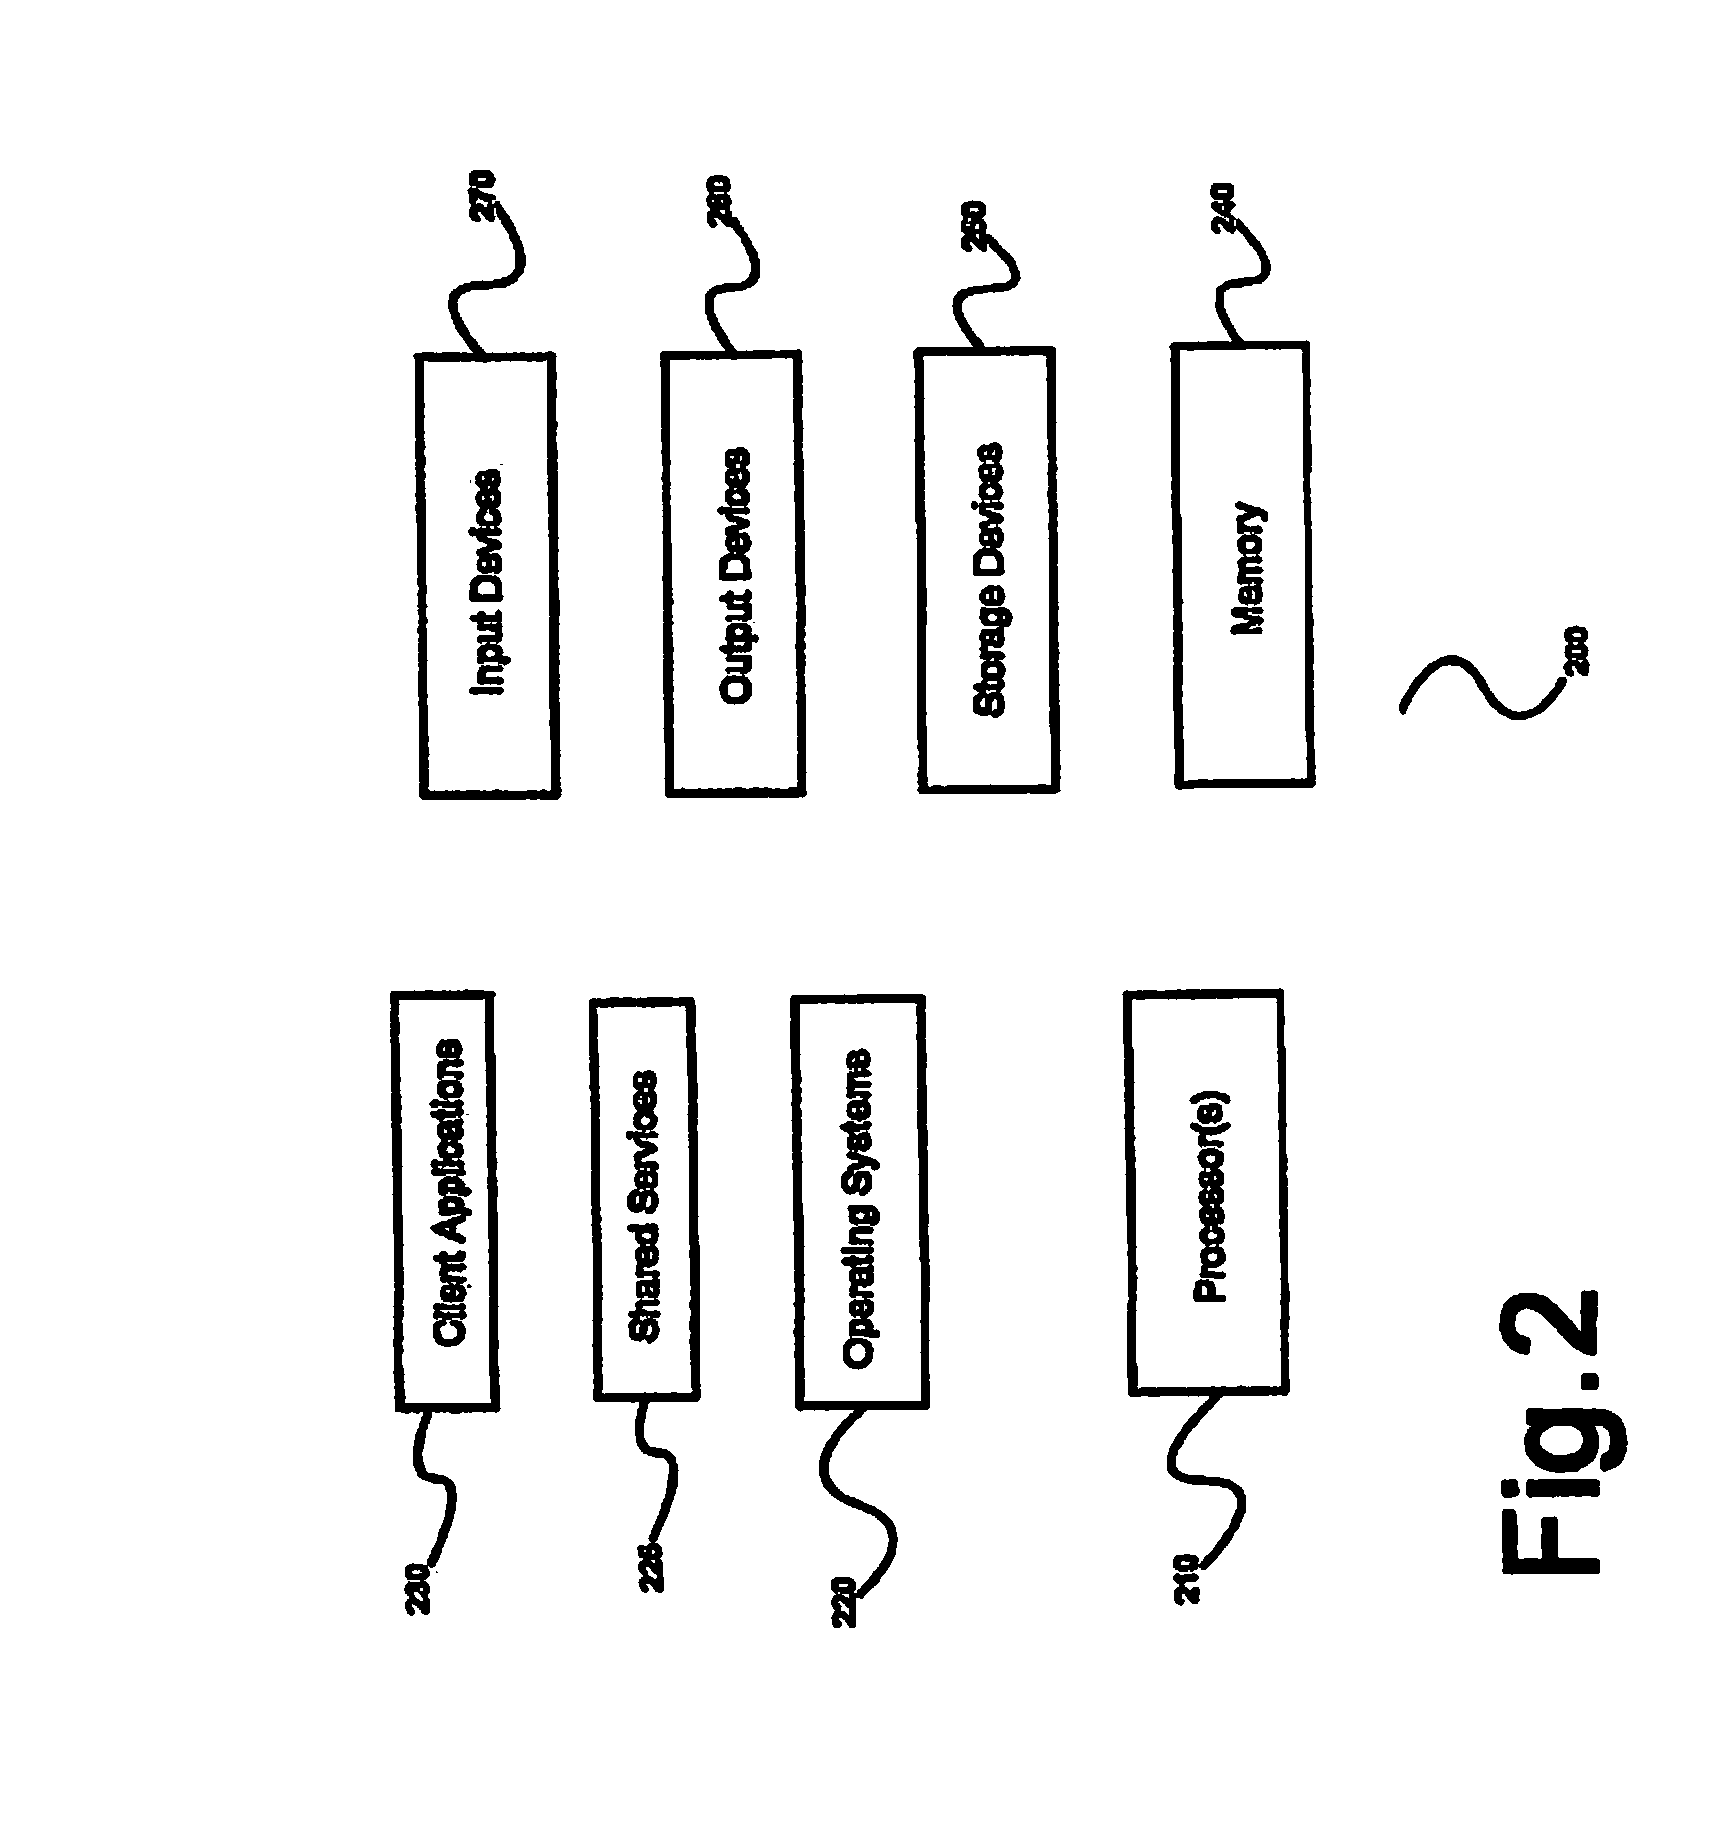 System and method for brand management using social networks